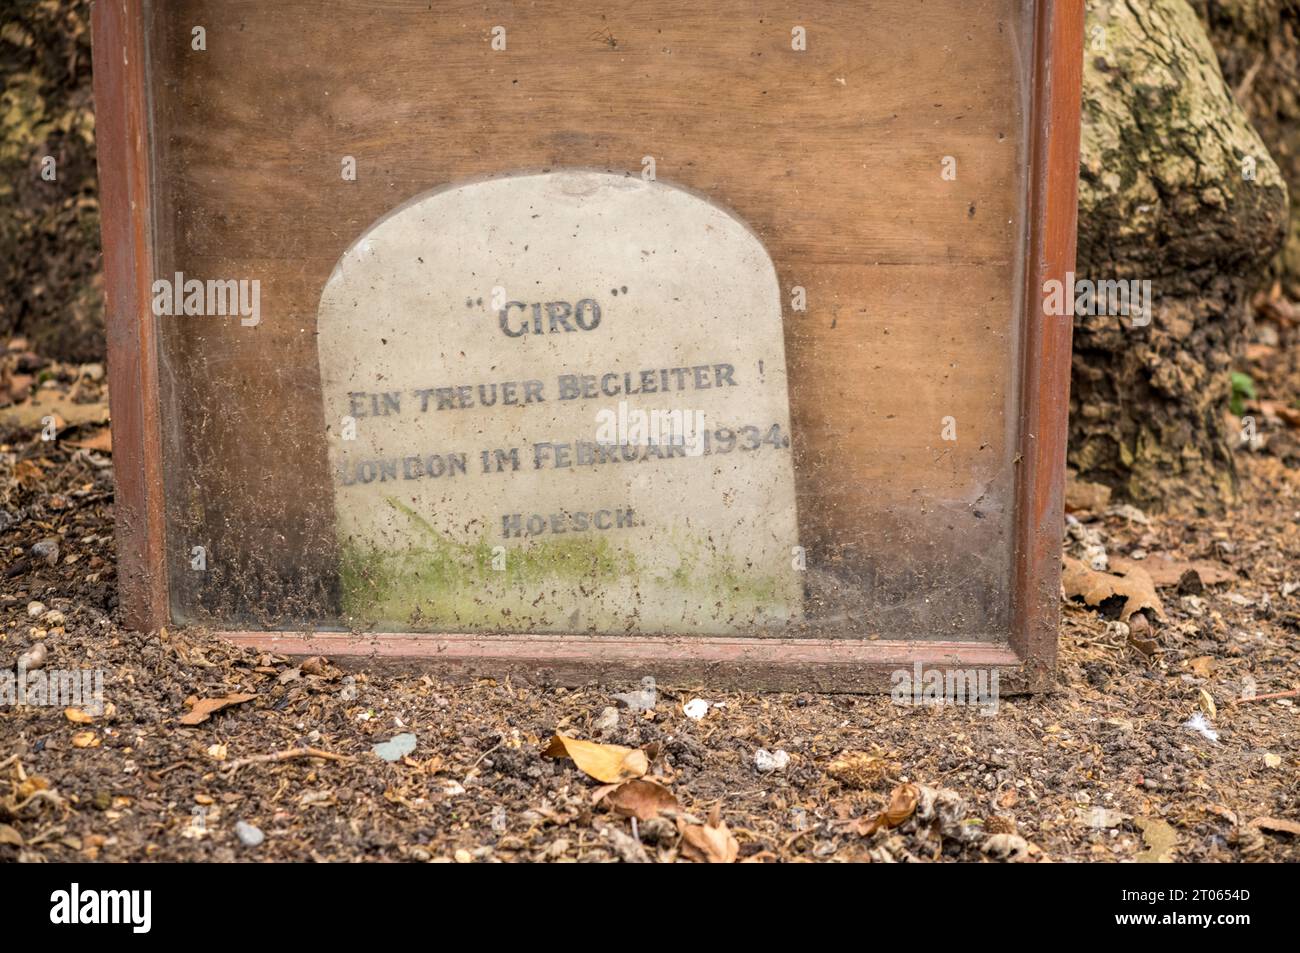 The grave of Giro, reputed to be the only Nazi dog to be buried in the heart of the city of London to the rear of the Mall. Buried in 1934. Stock Photo